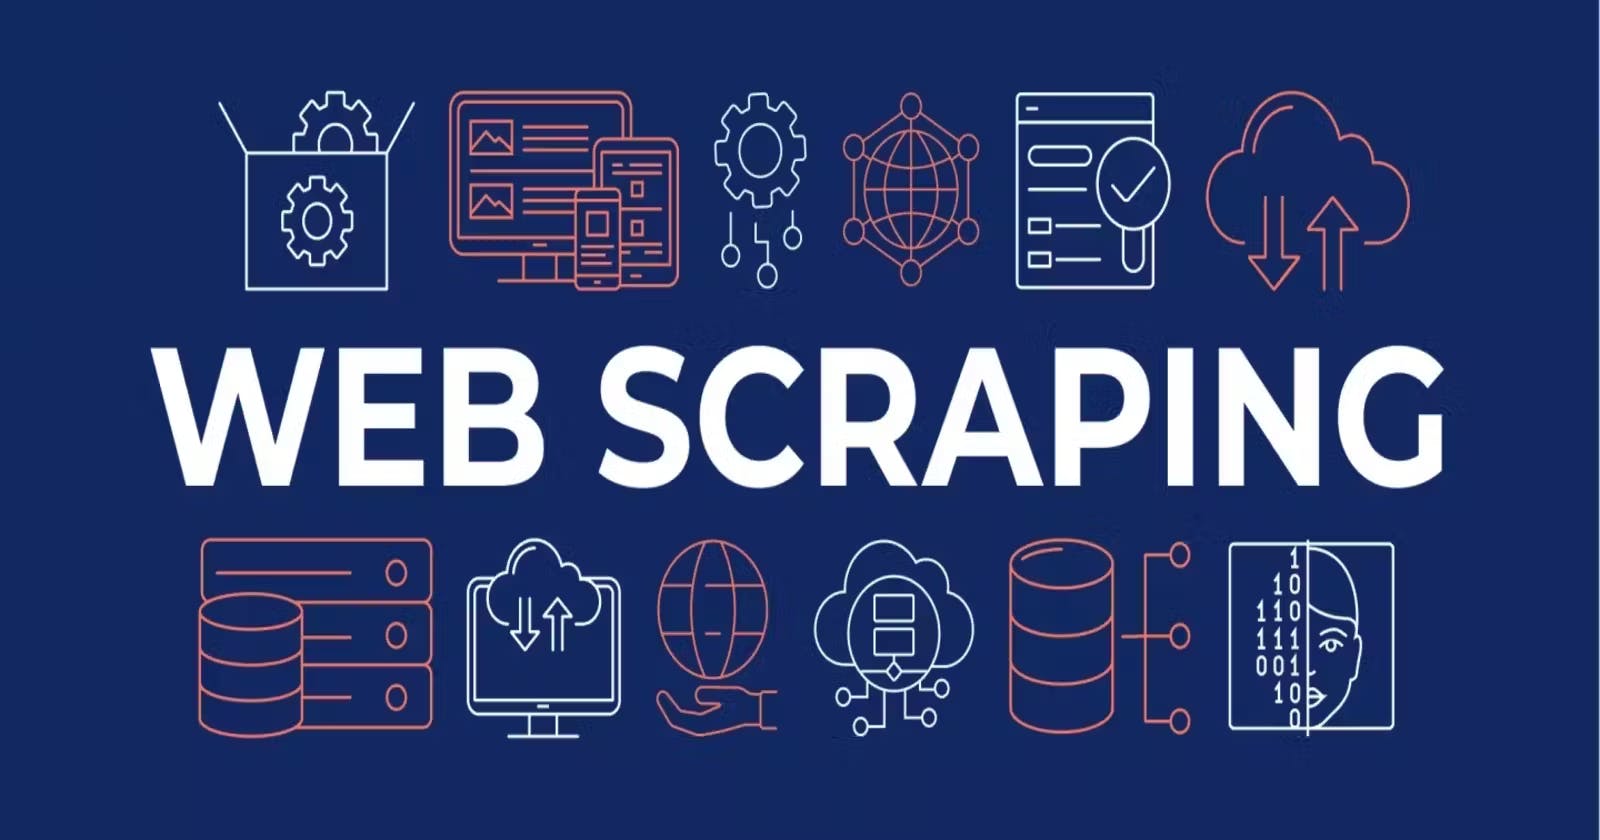 Web Scraping: Harvesting Data from the Web